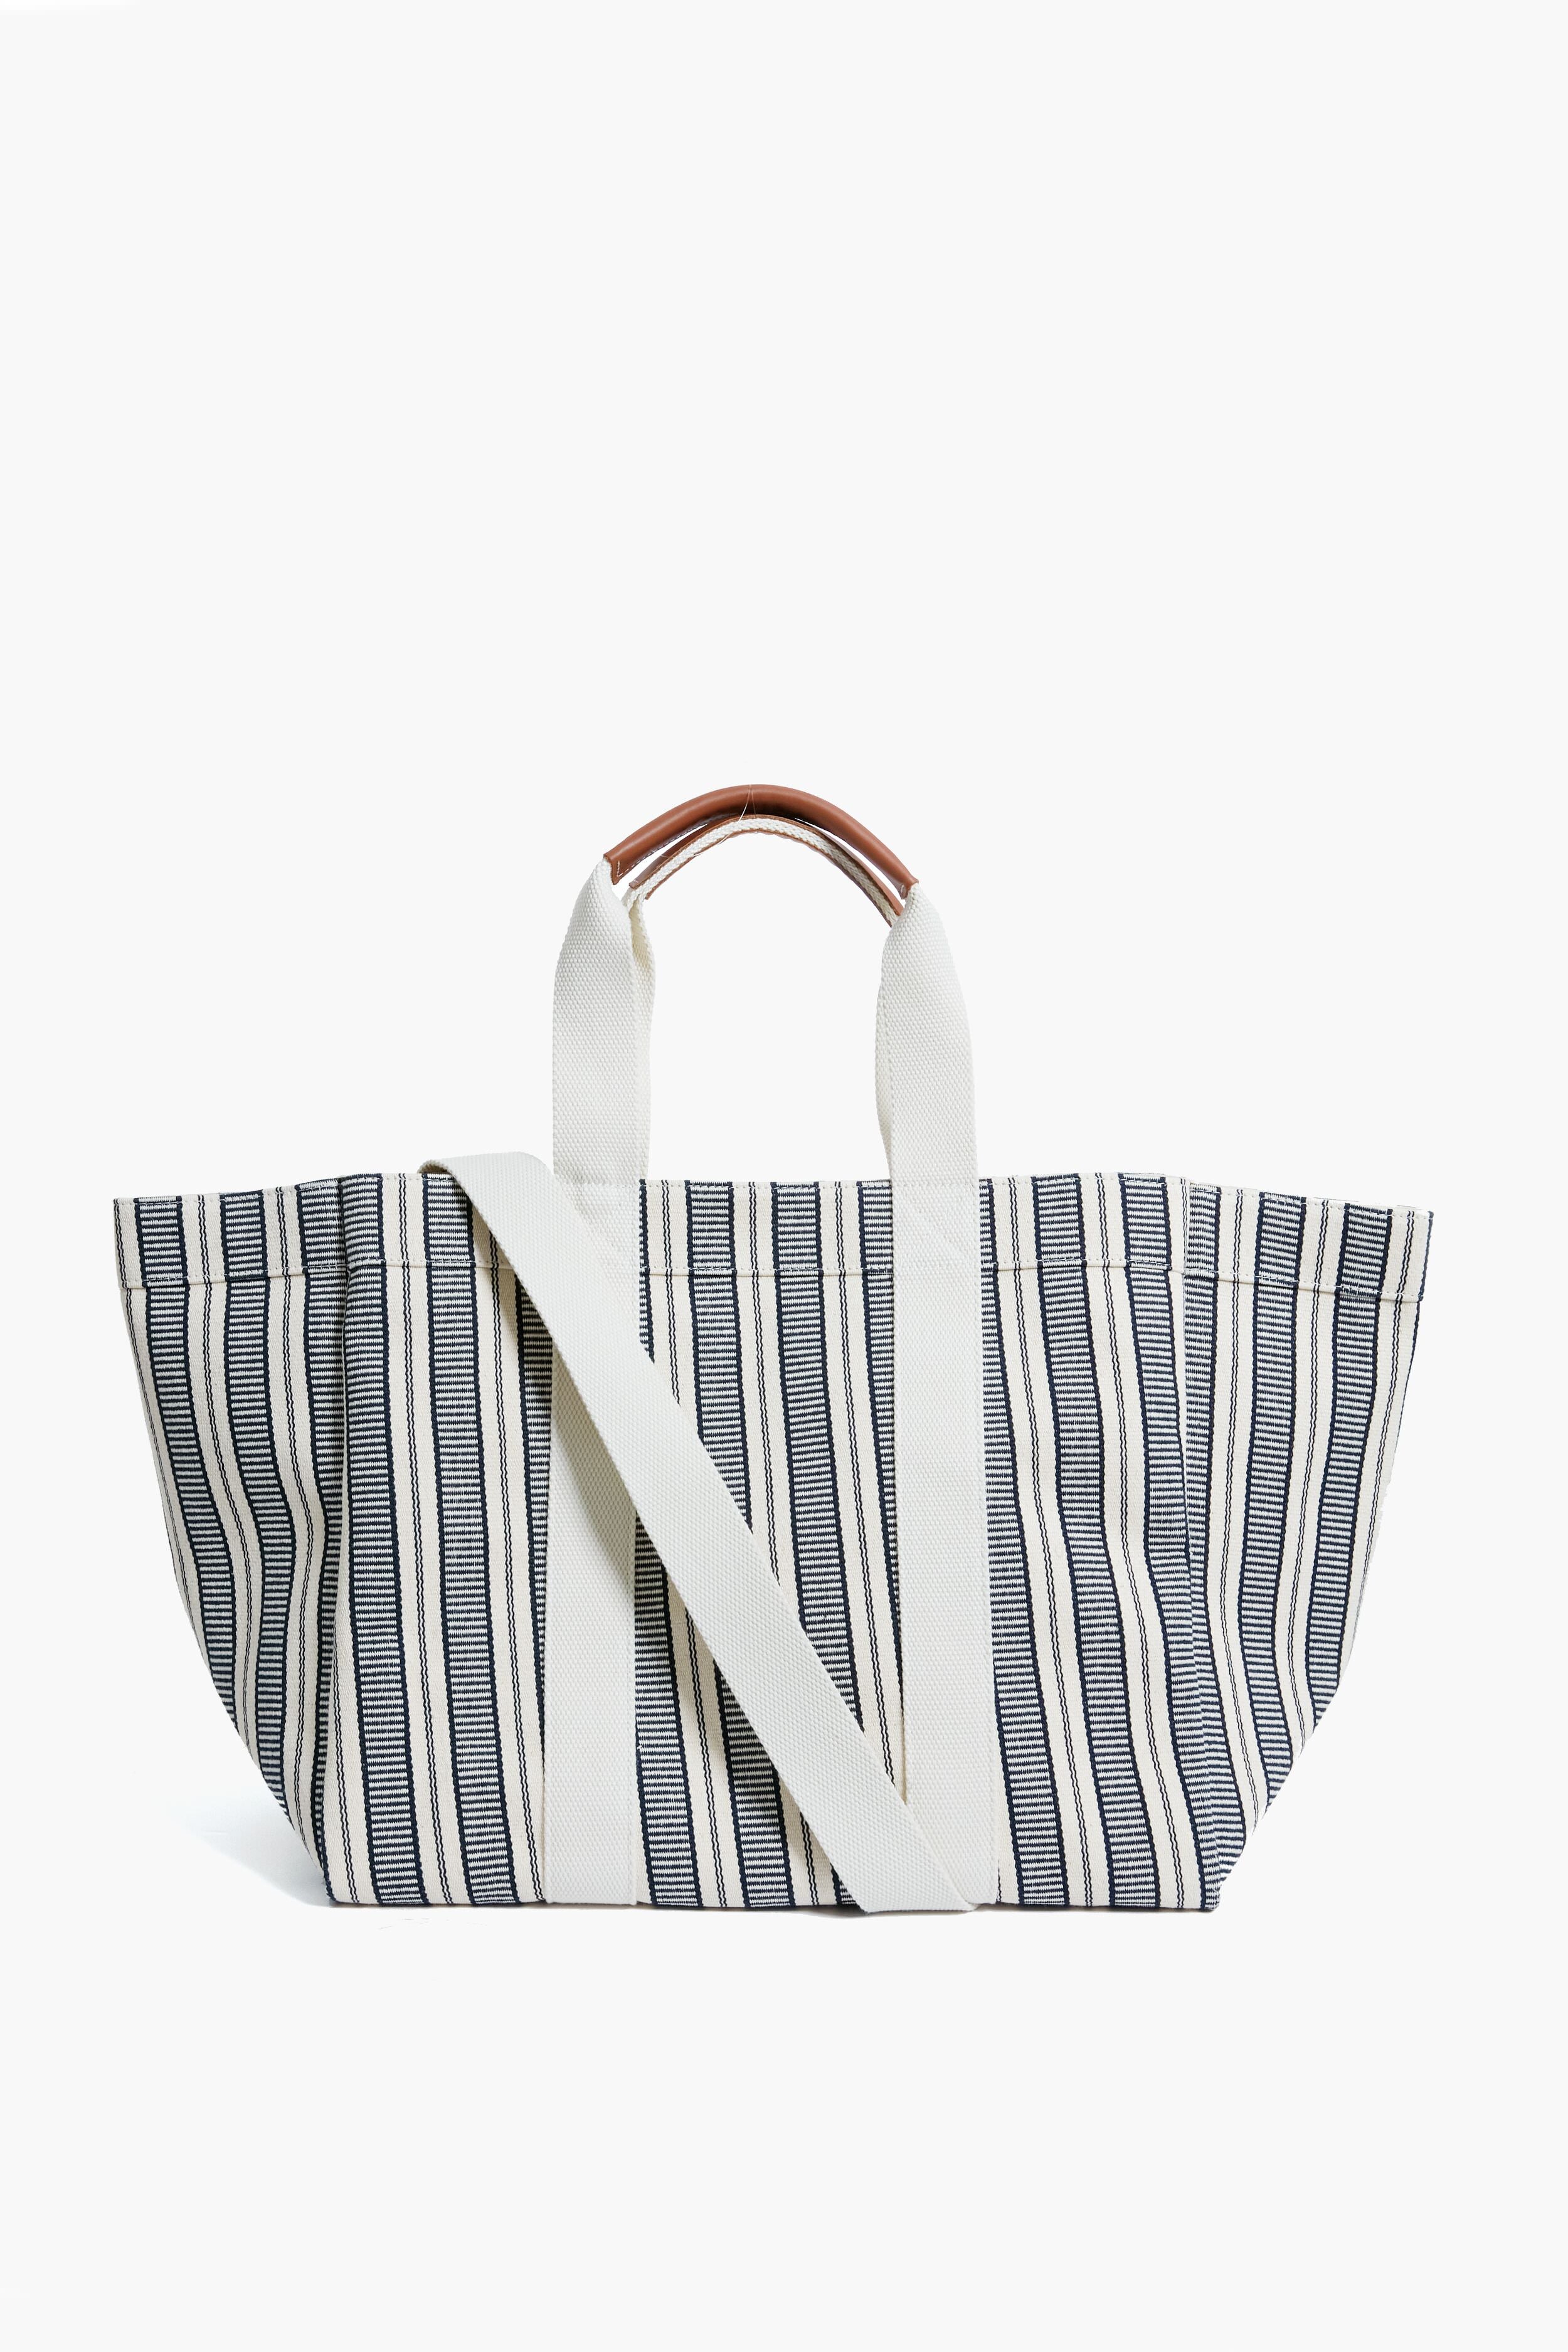 Giant Trop in Washed Denim is your perfect summer weekend bag